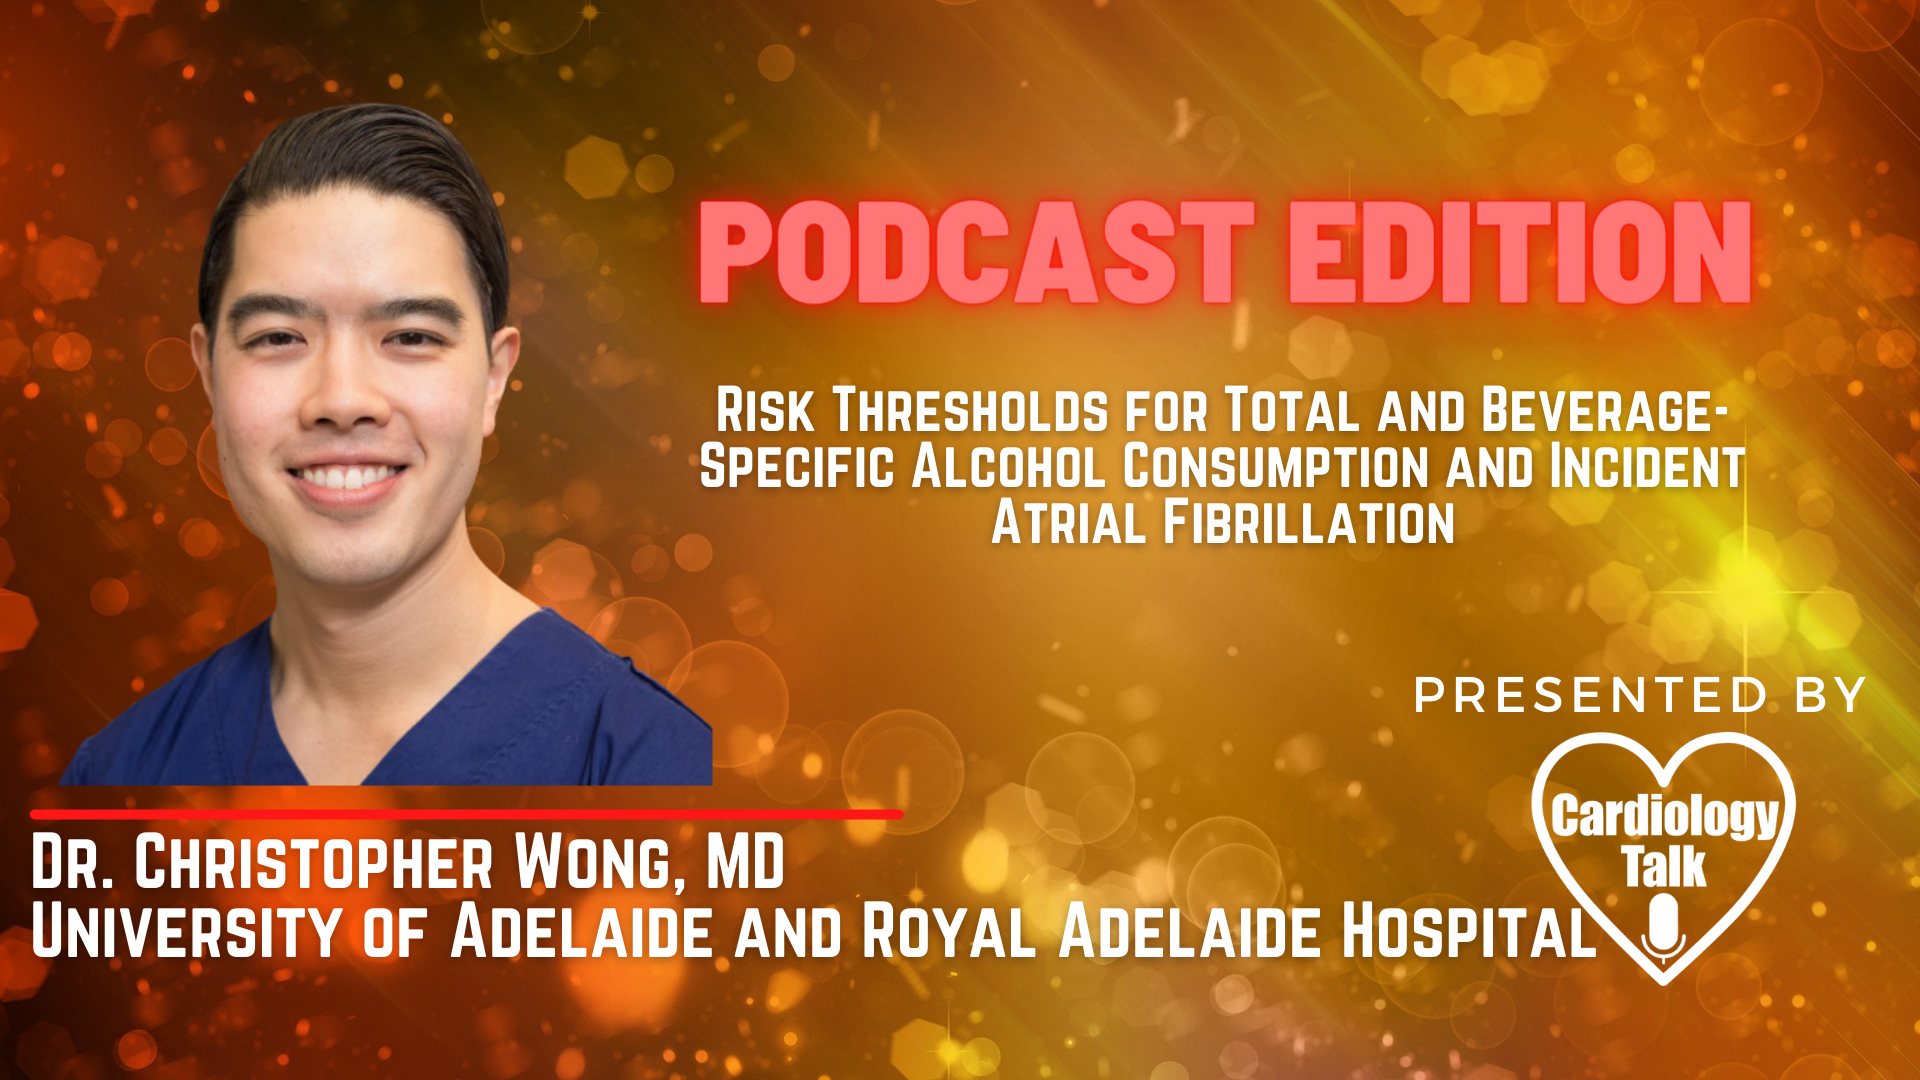 Podcast- Dr. Christopher Wong, MD- Risk Thresholds for Total and Beverage-Specific Alcohol Consumption and Incident Atrial Fibrillation @WongChrisX   @UniofAdelaide  #AlcoholCunsumption #...